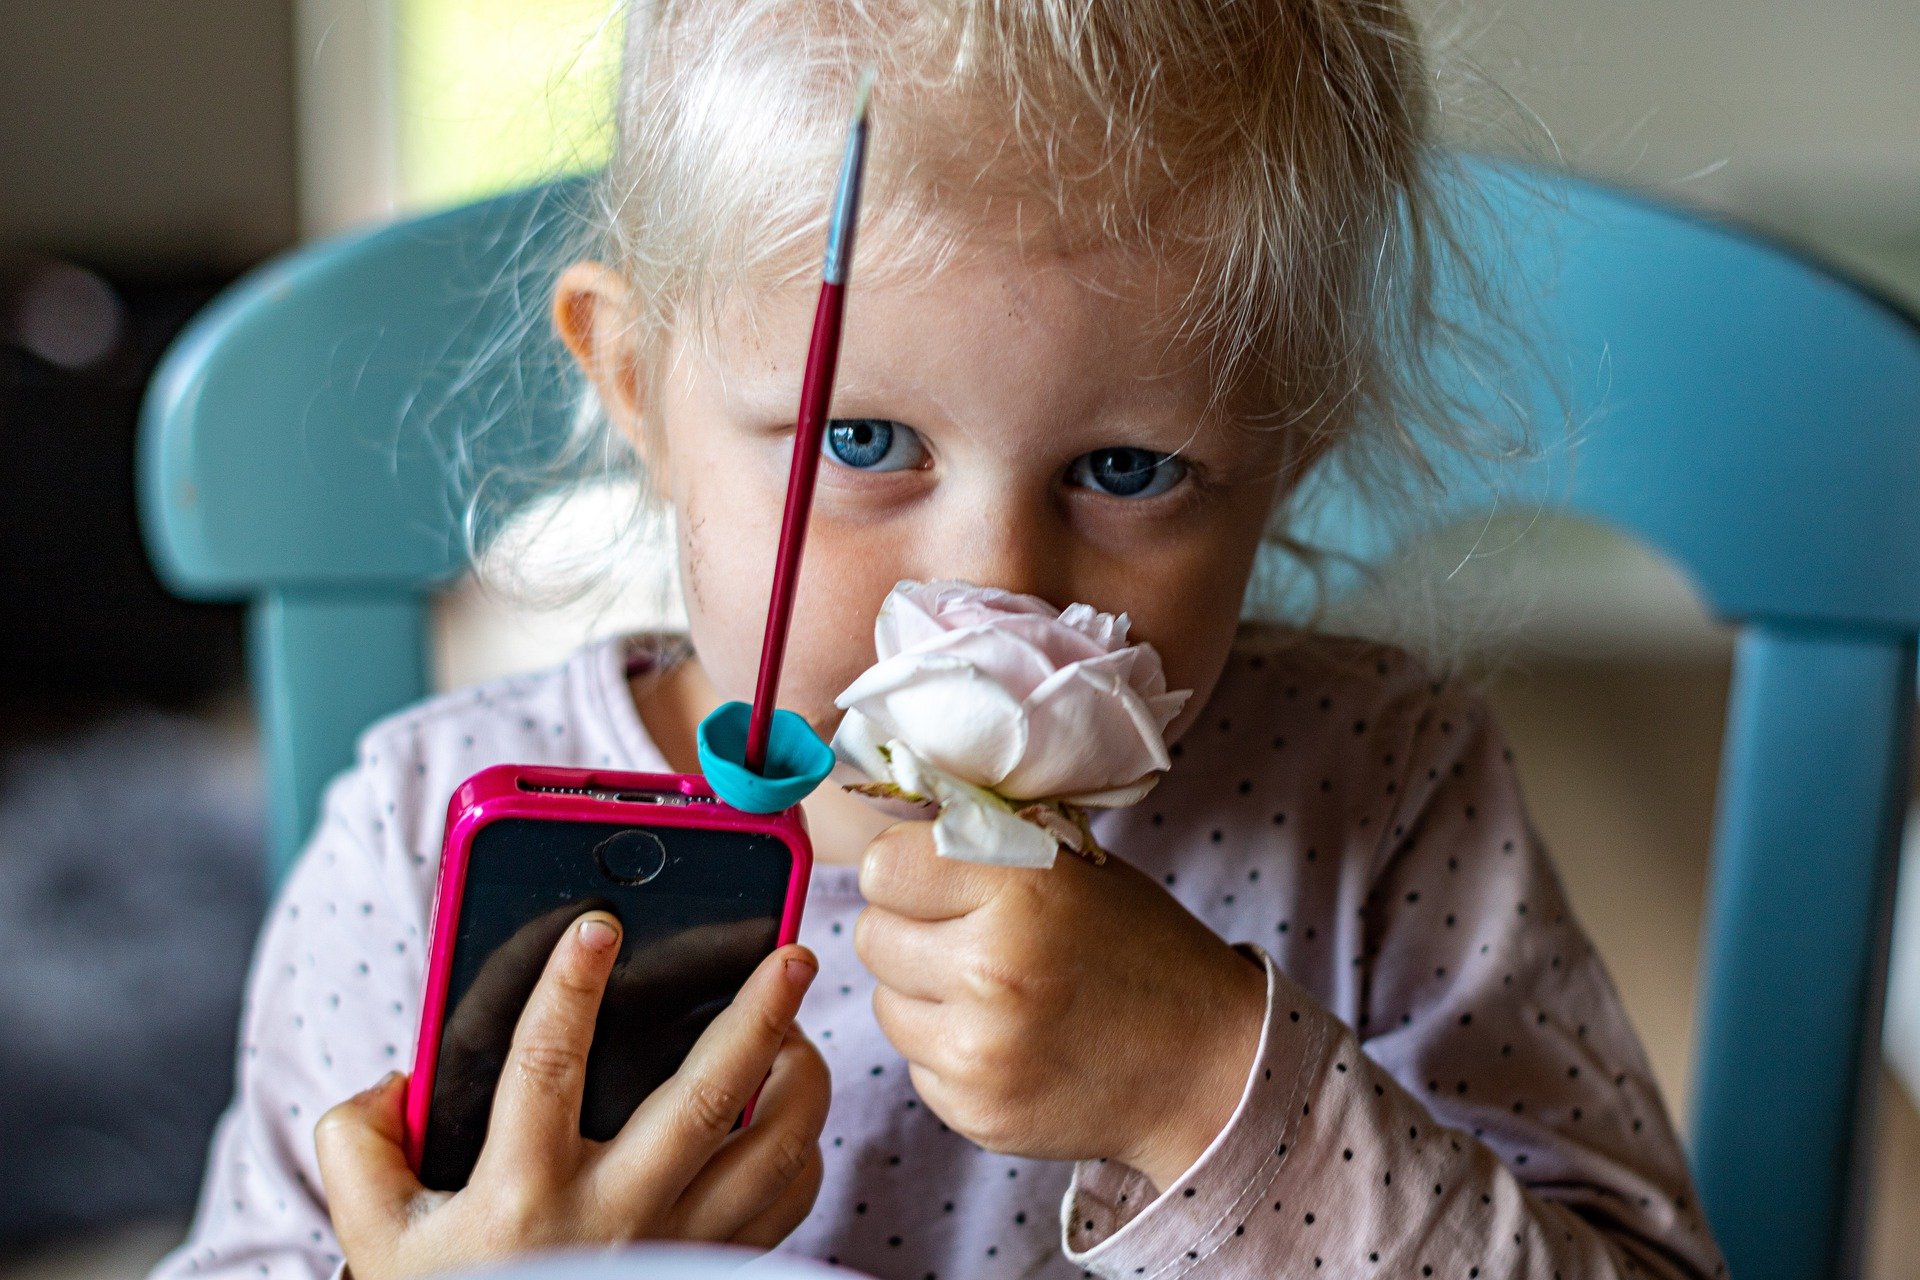 A little girl holding a phone. | Photo: Pixabay